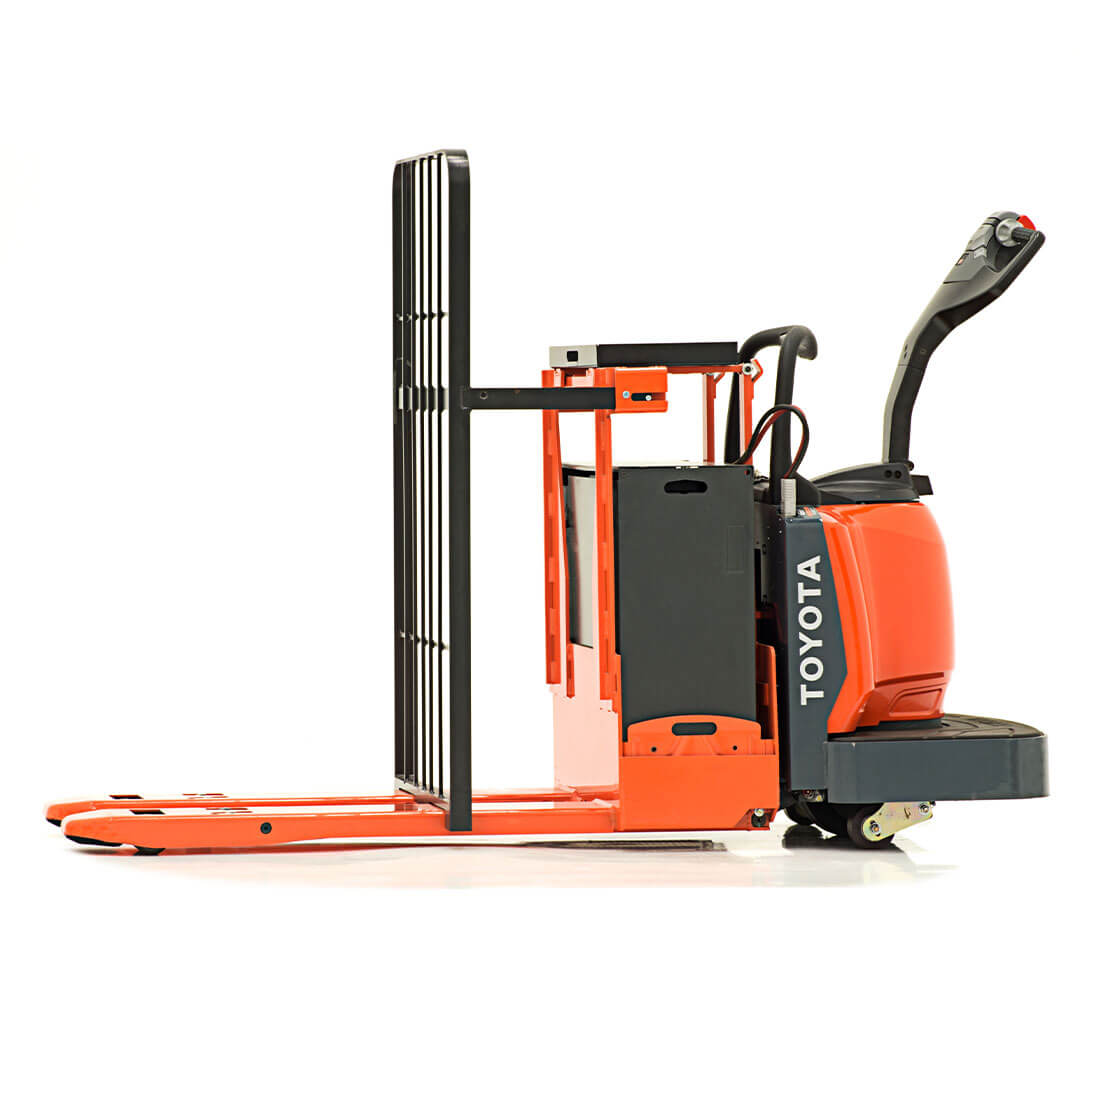 End-Controlled Rider Pallet Jack